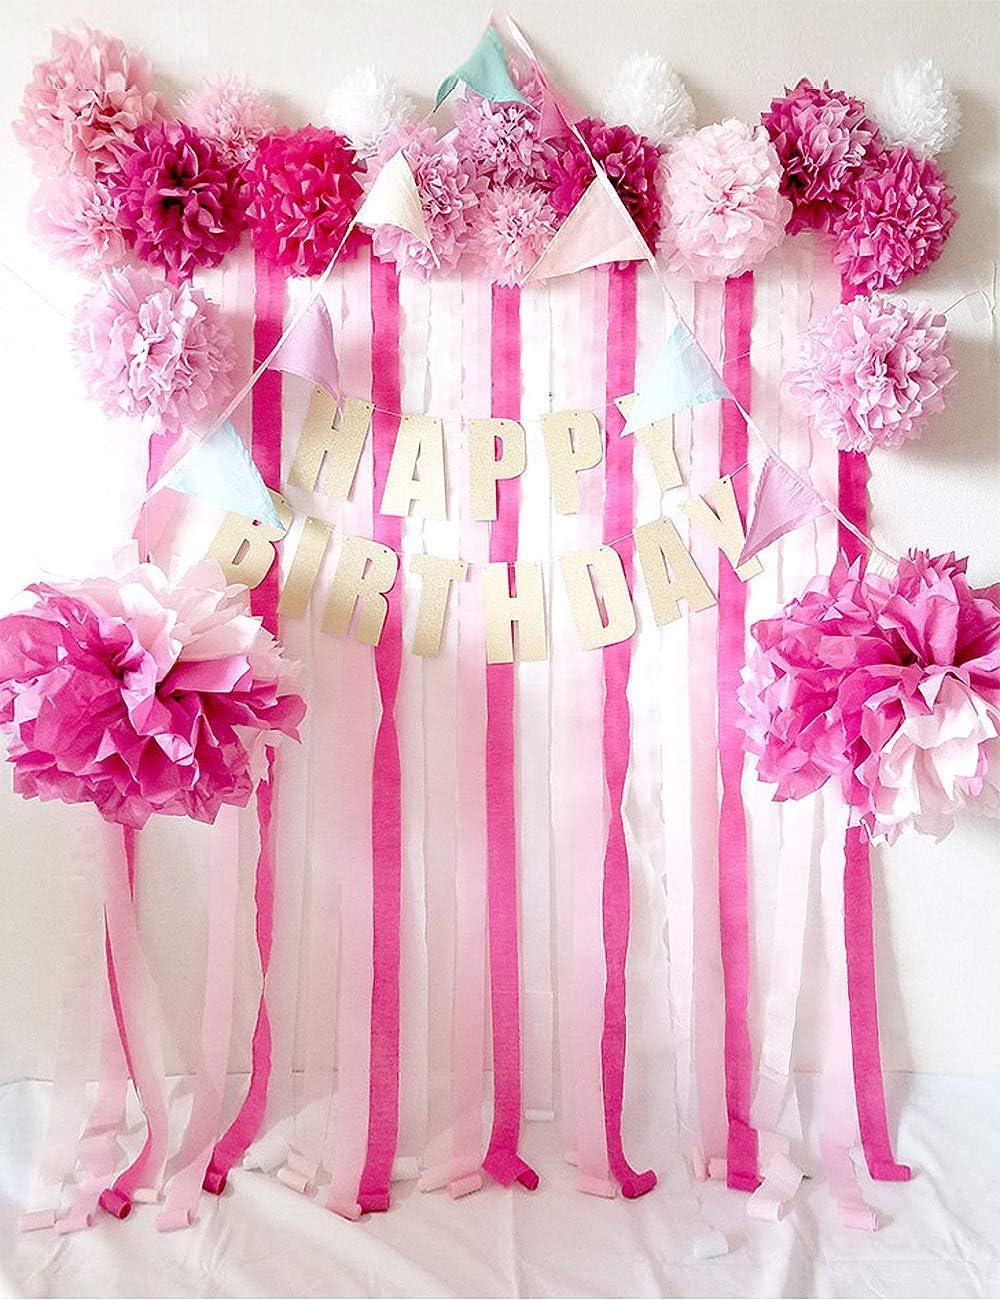 GAKA Pink Crepe Paper Streamers Tassels Streamers 6 Rolls 3 Color for  Various Birthday Party/Wedding Festival Party/Gender Reveal Party/Baby